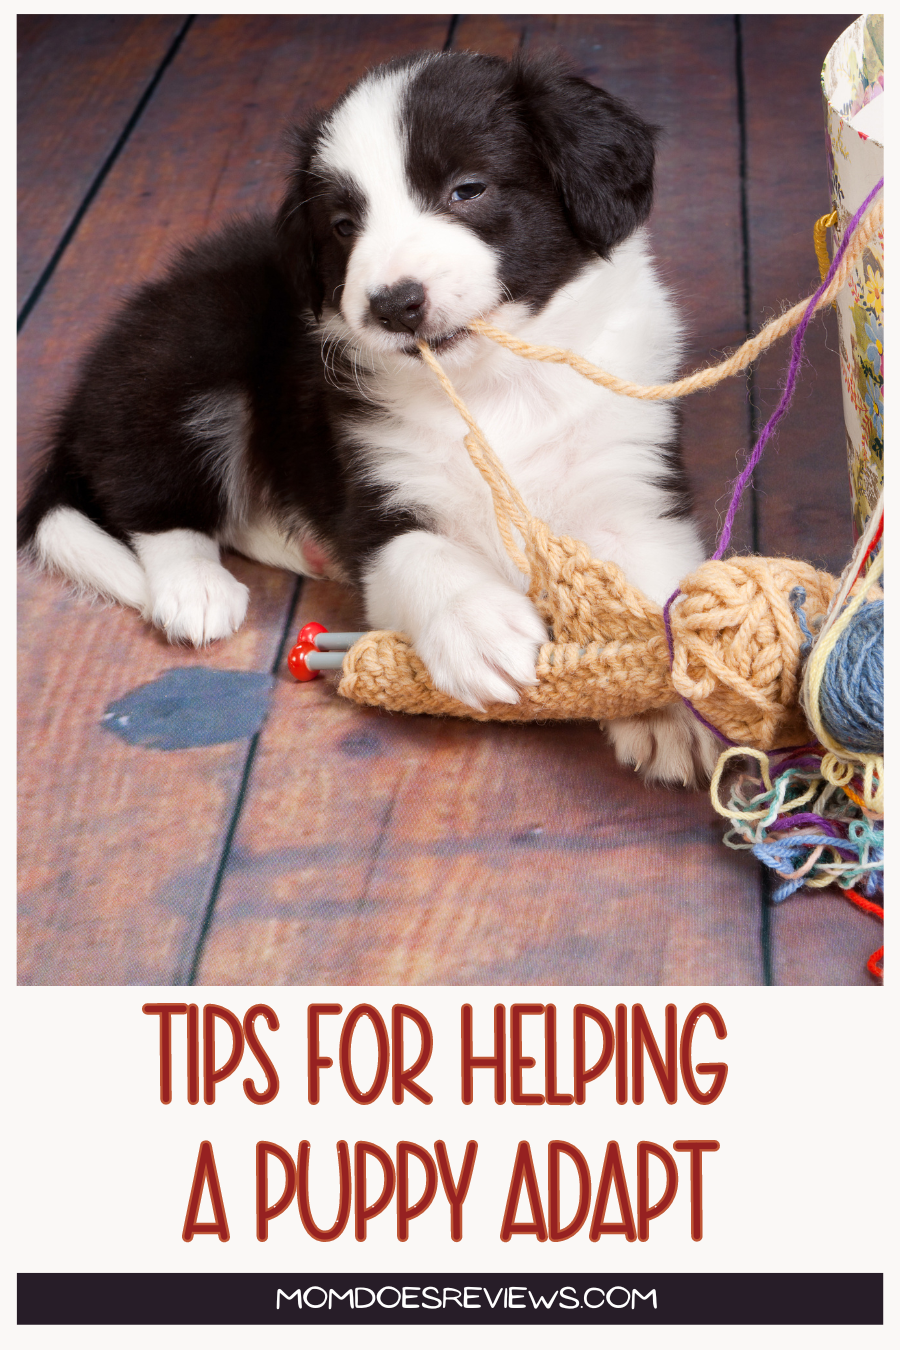 Tips for Helping a Puppy Adapt